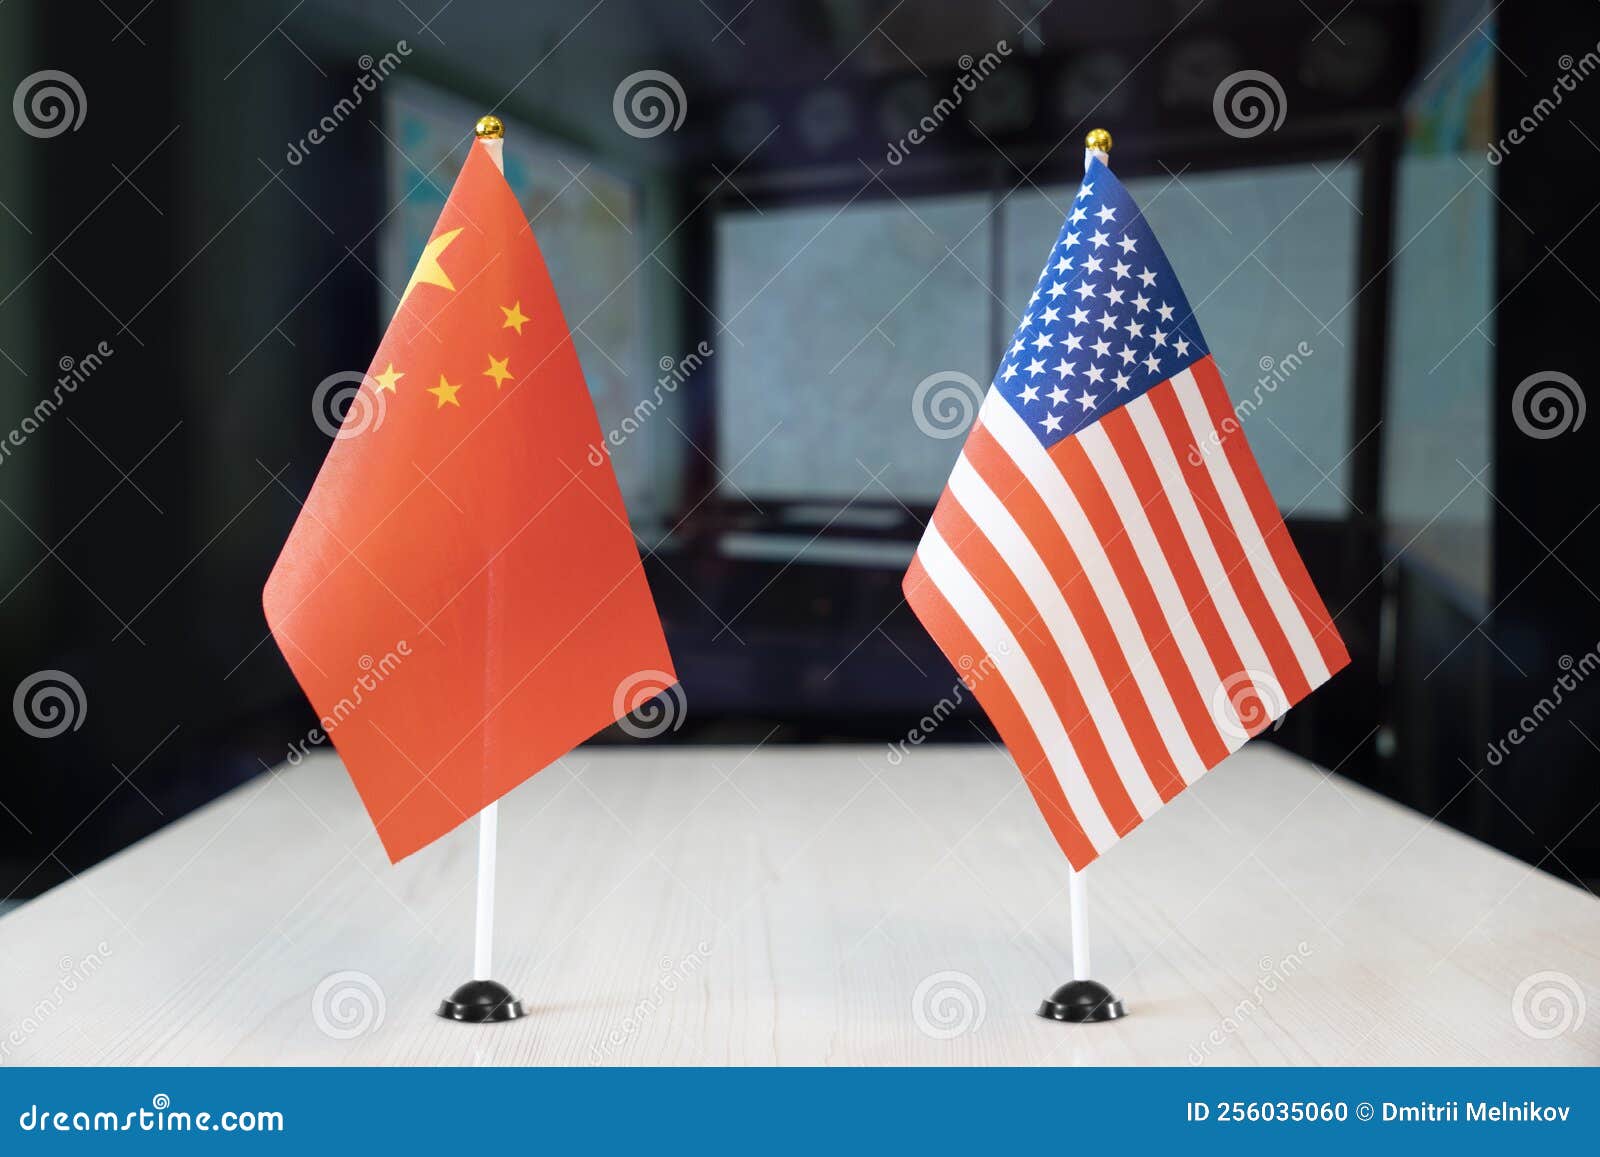 flags of united states and china international negotiations. conclusion of contracts between countries. concept of communication